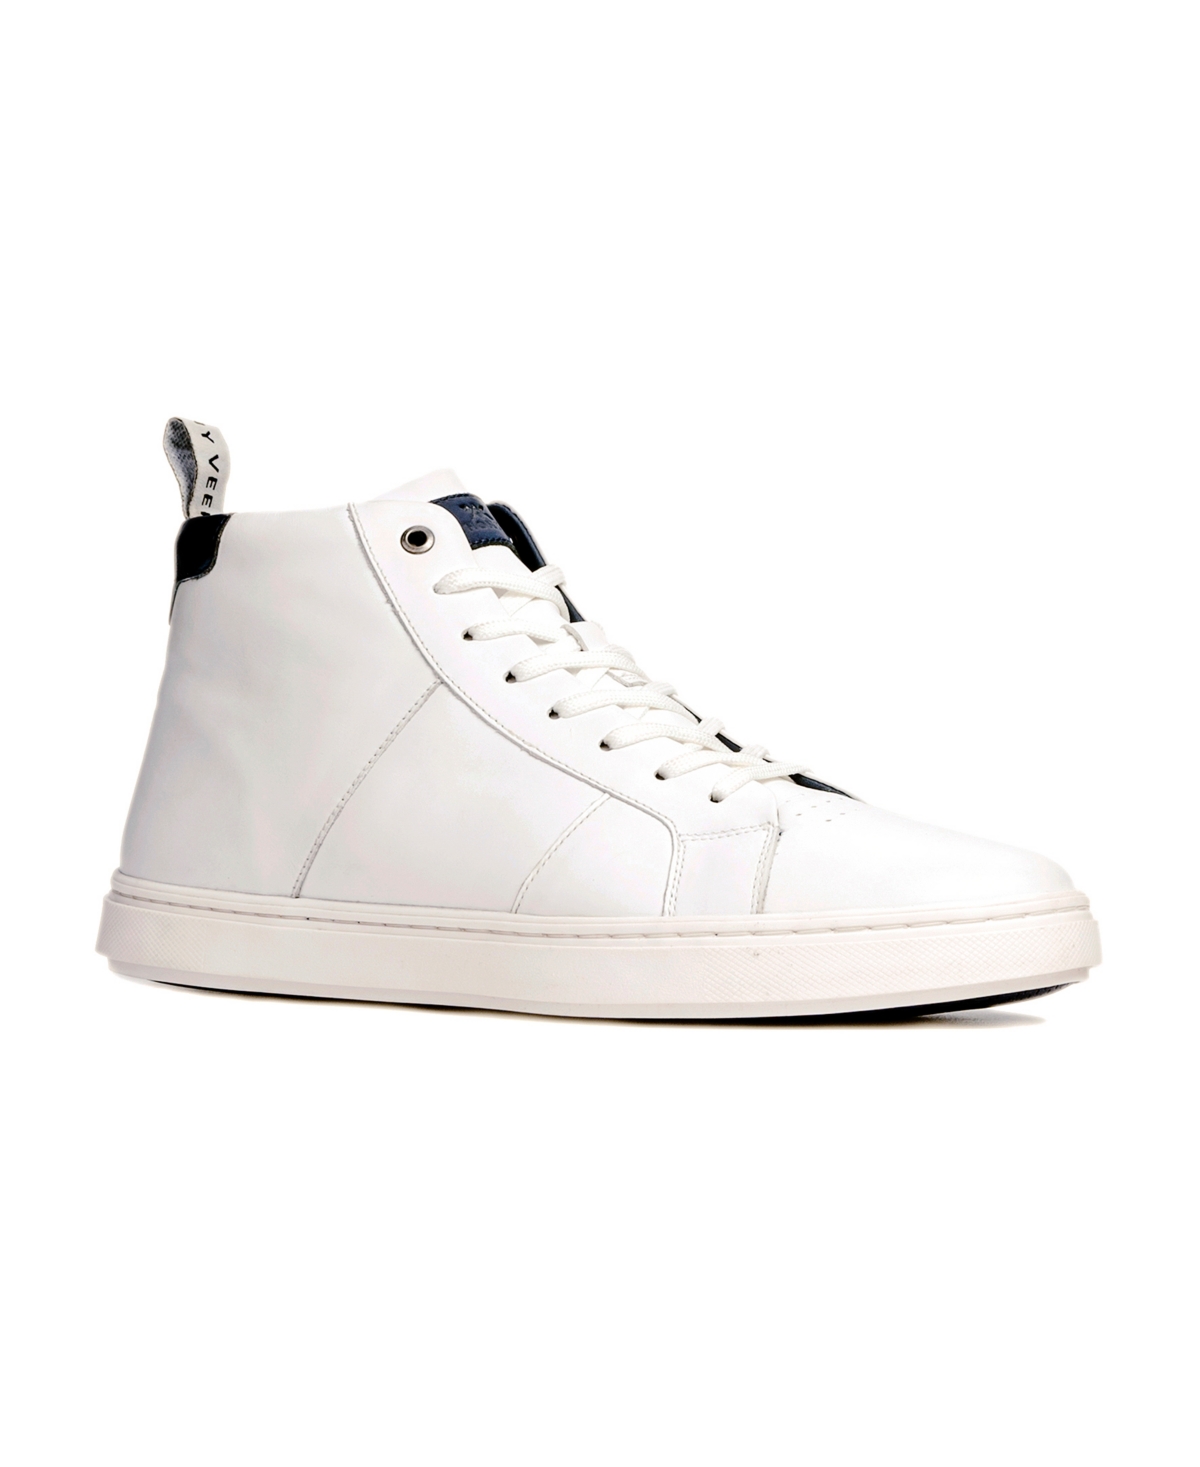 Anthony Veer Men's Kips High-top Fashion Sneakers In White